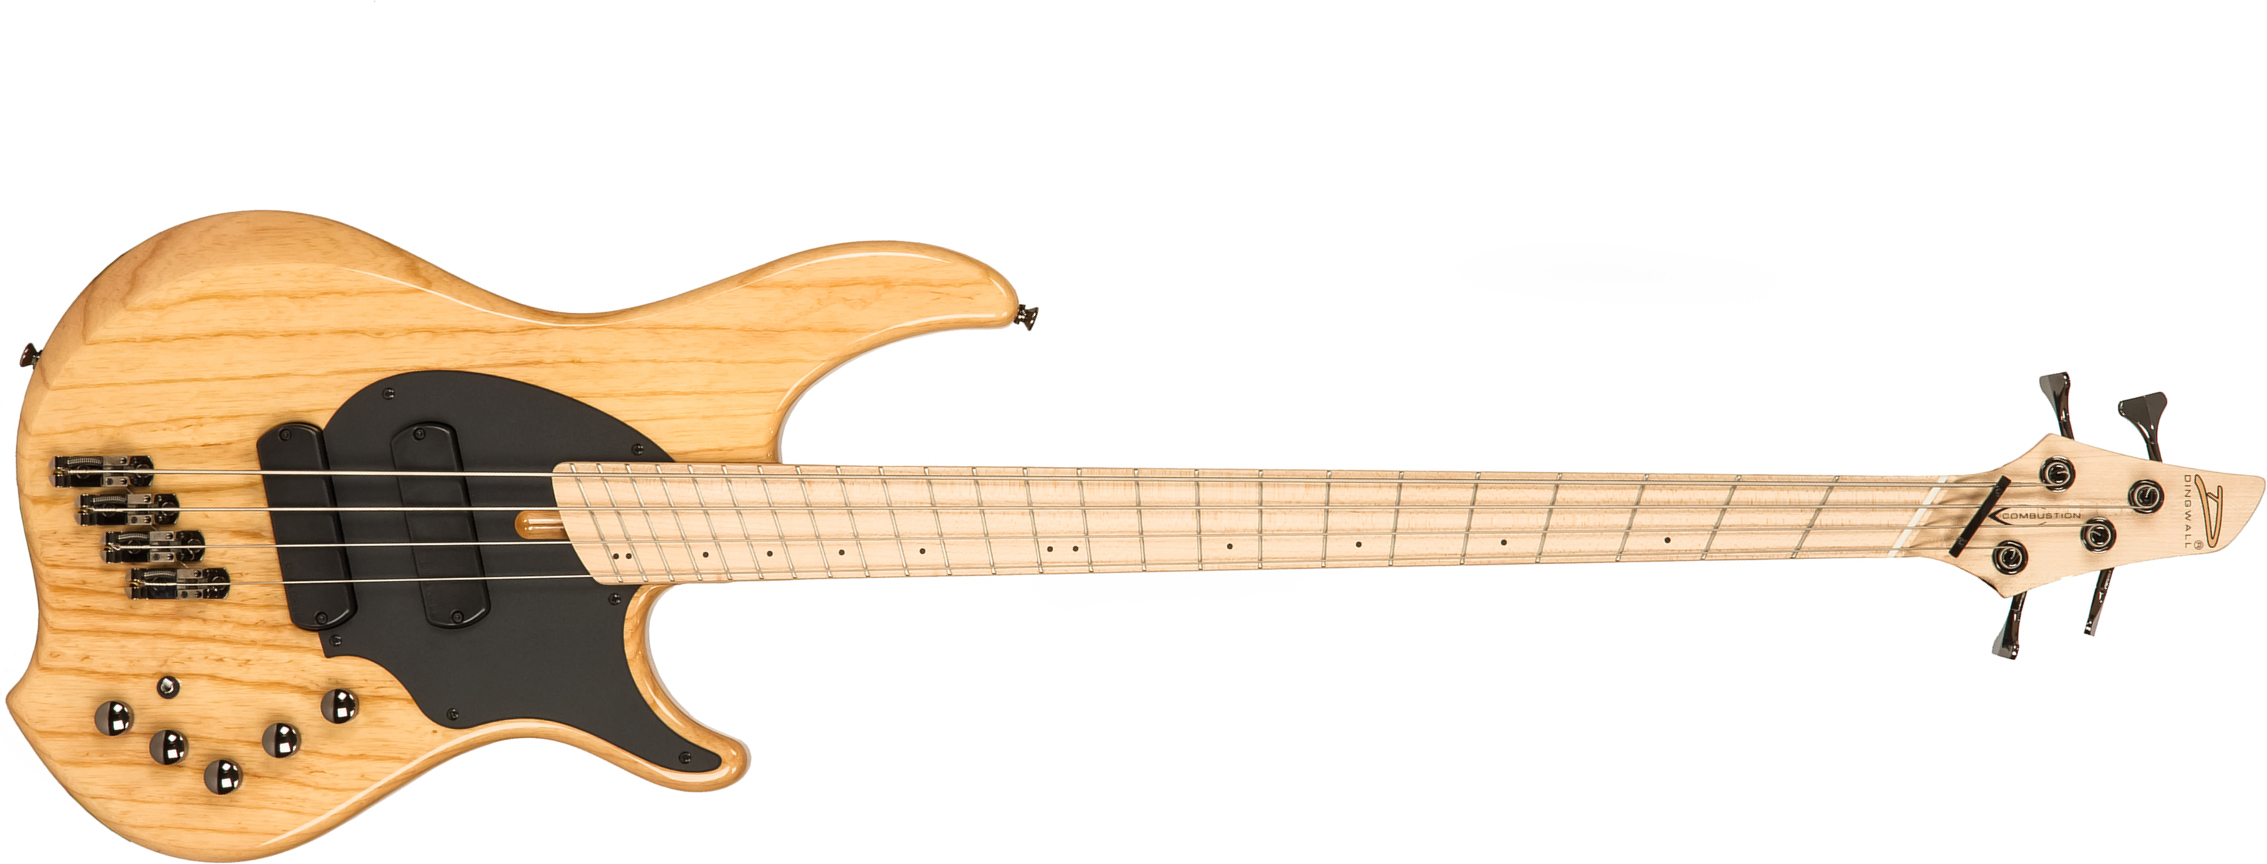 Dingwall Combustion Cb2 4c 2pu Mn - Natural - Solidbody E-bass - Main picture